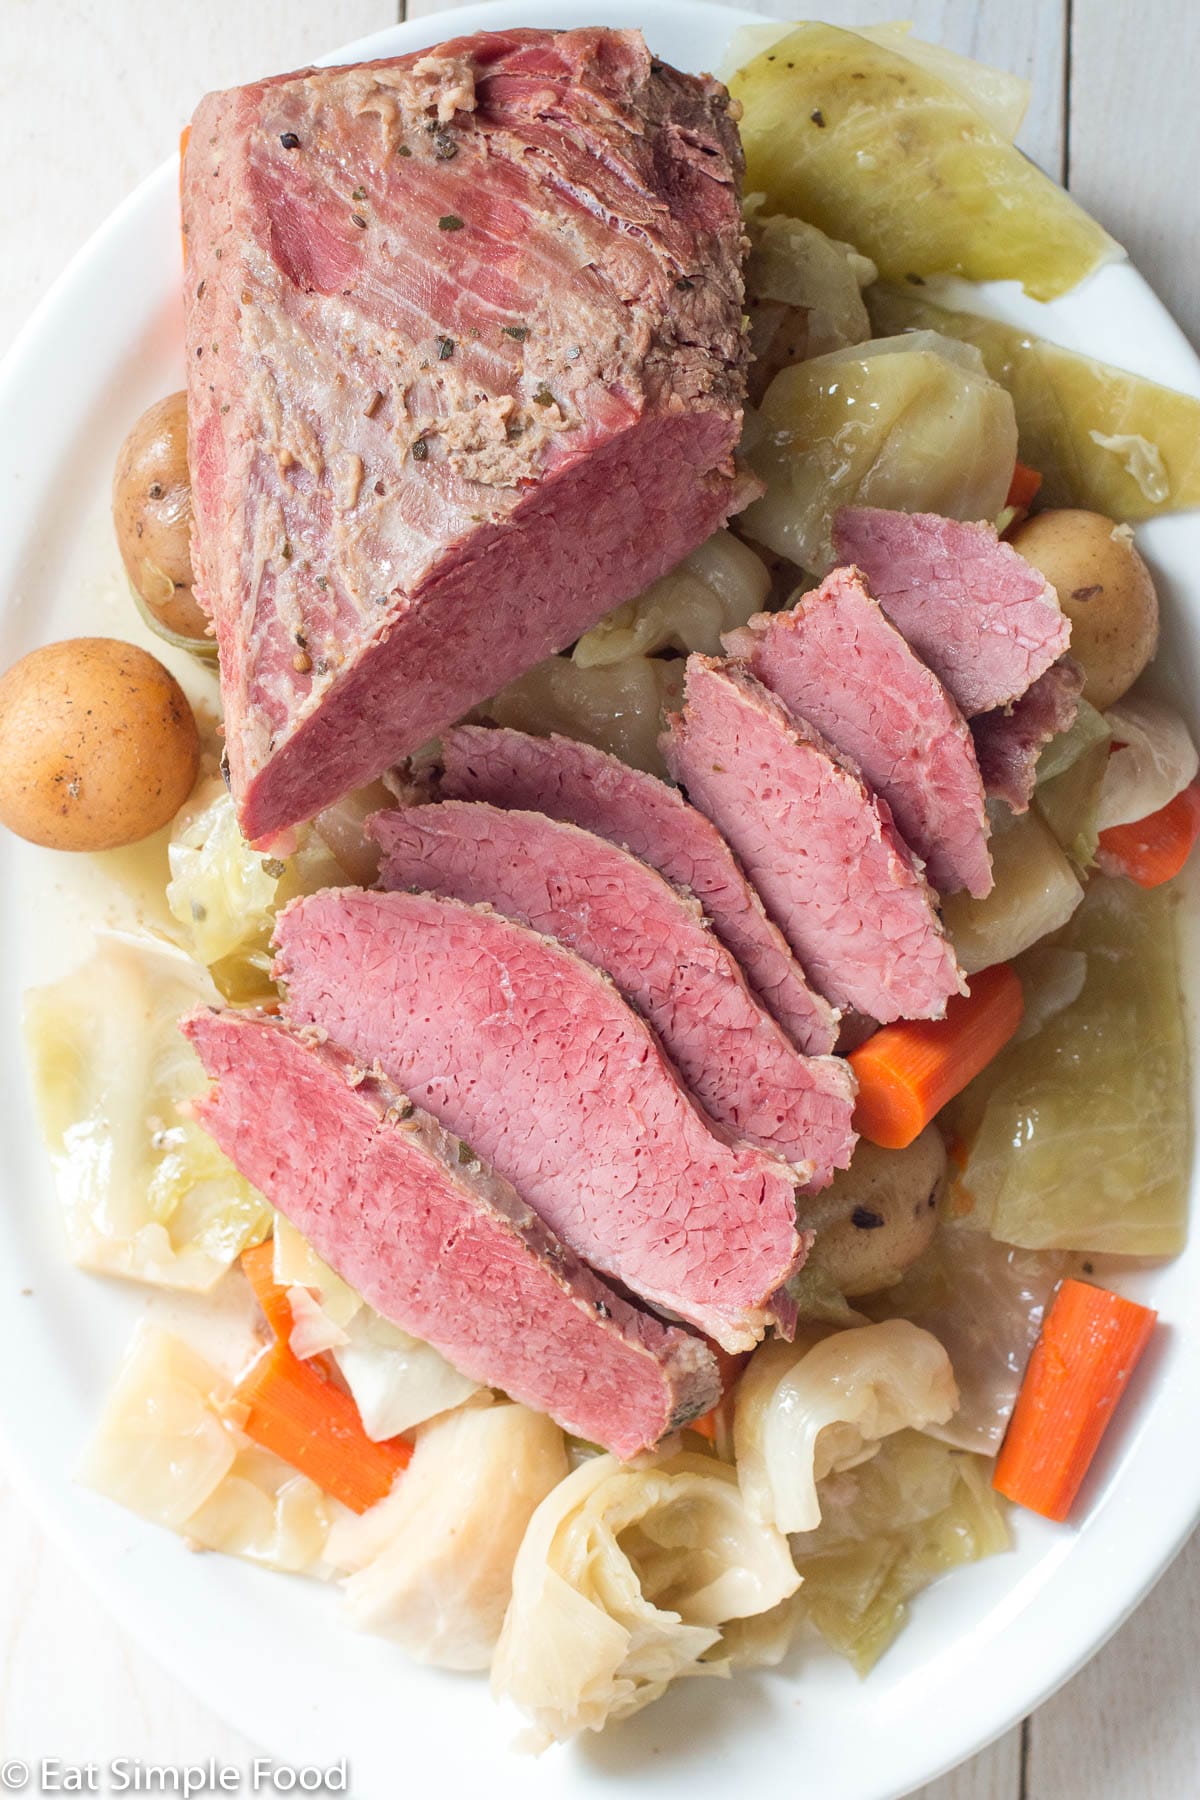 Top down view of a chunk of corned beef with layered pink thin slices on a bed of cooked cabbage, carrots, and baby potaotes.